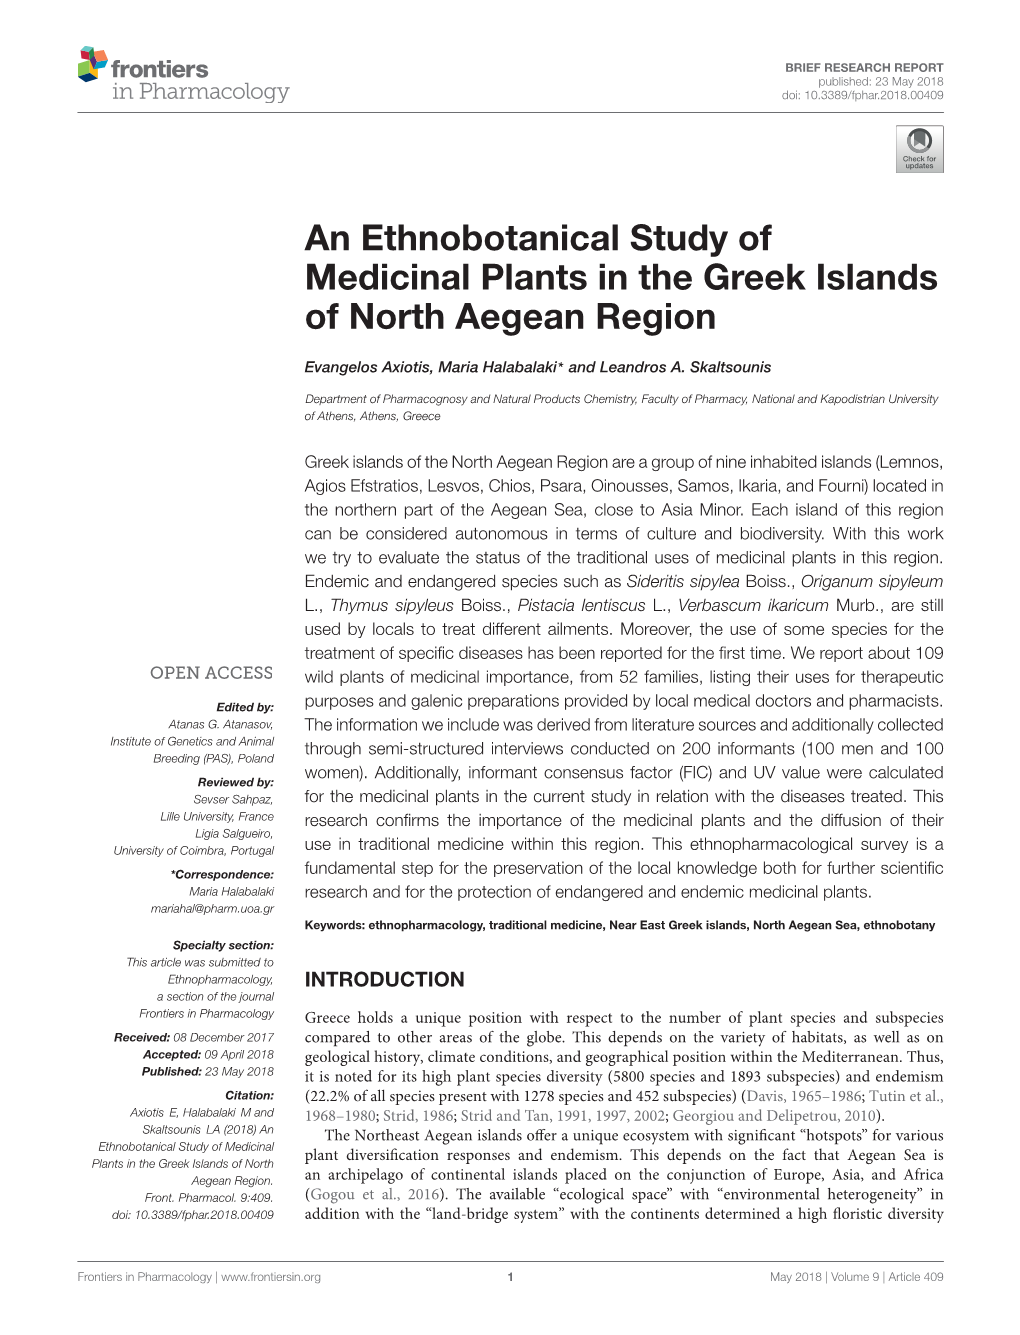 An Ethnobotanical Study of Medicinal Plants in the Greek Islands of North Aegean Region